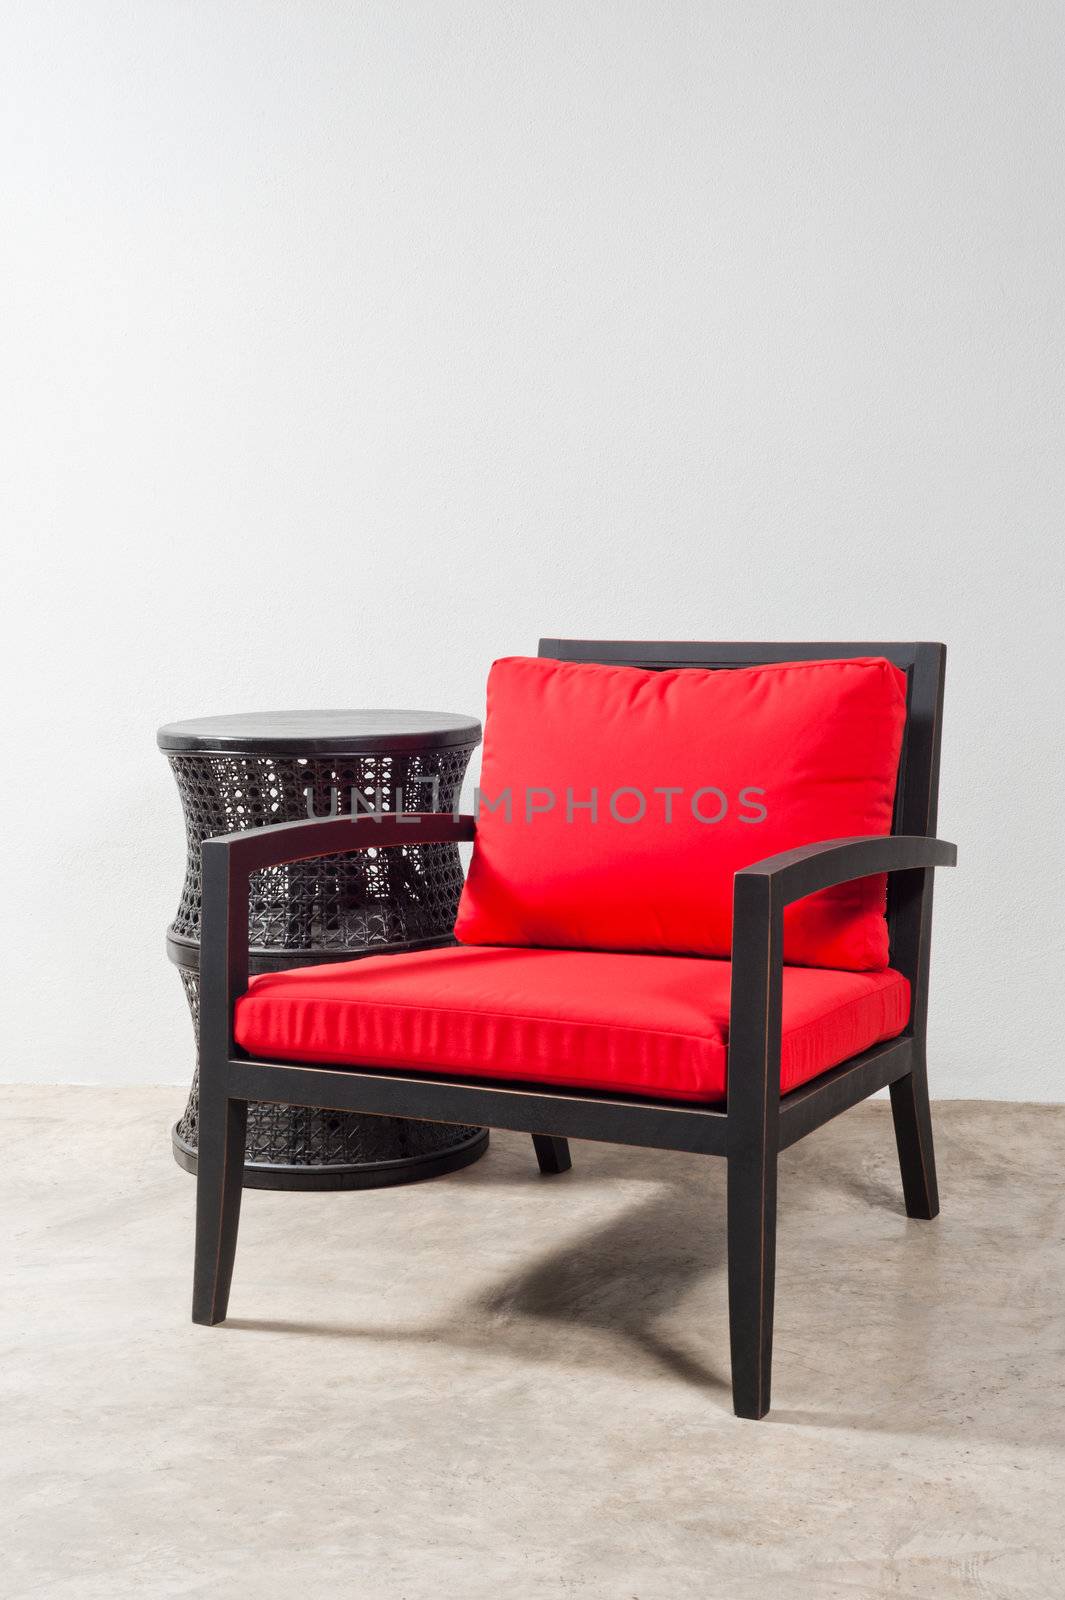 Black red Chair and side table in a bright setting